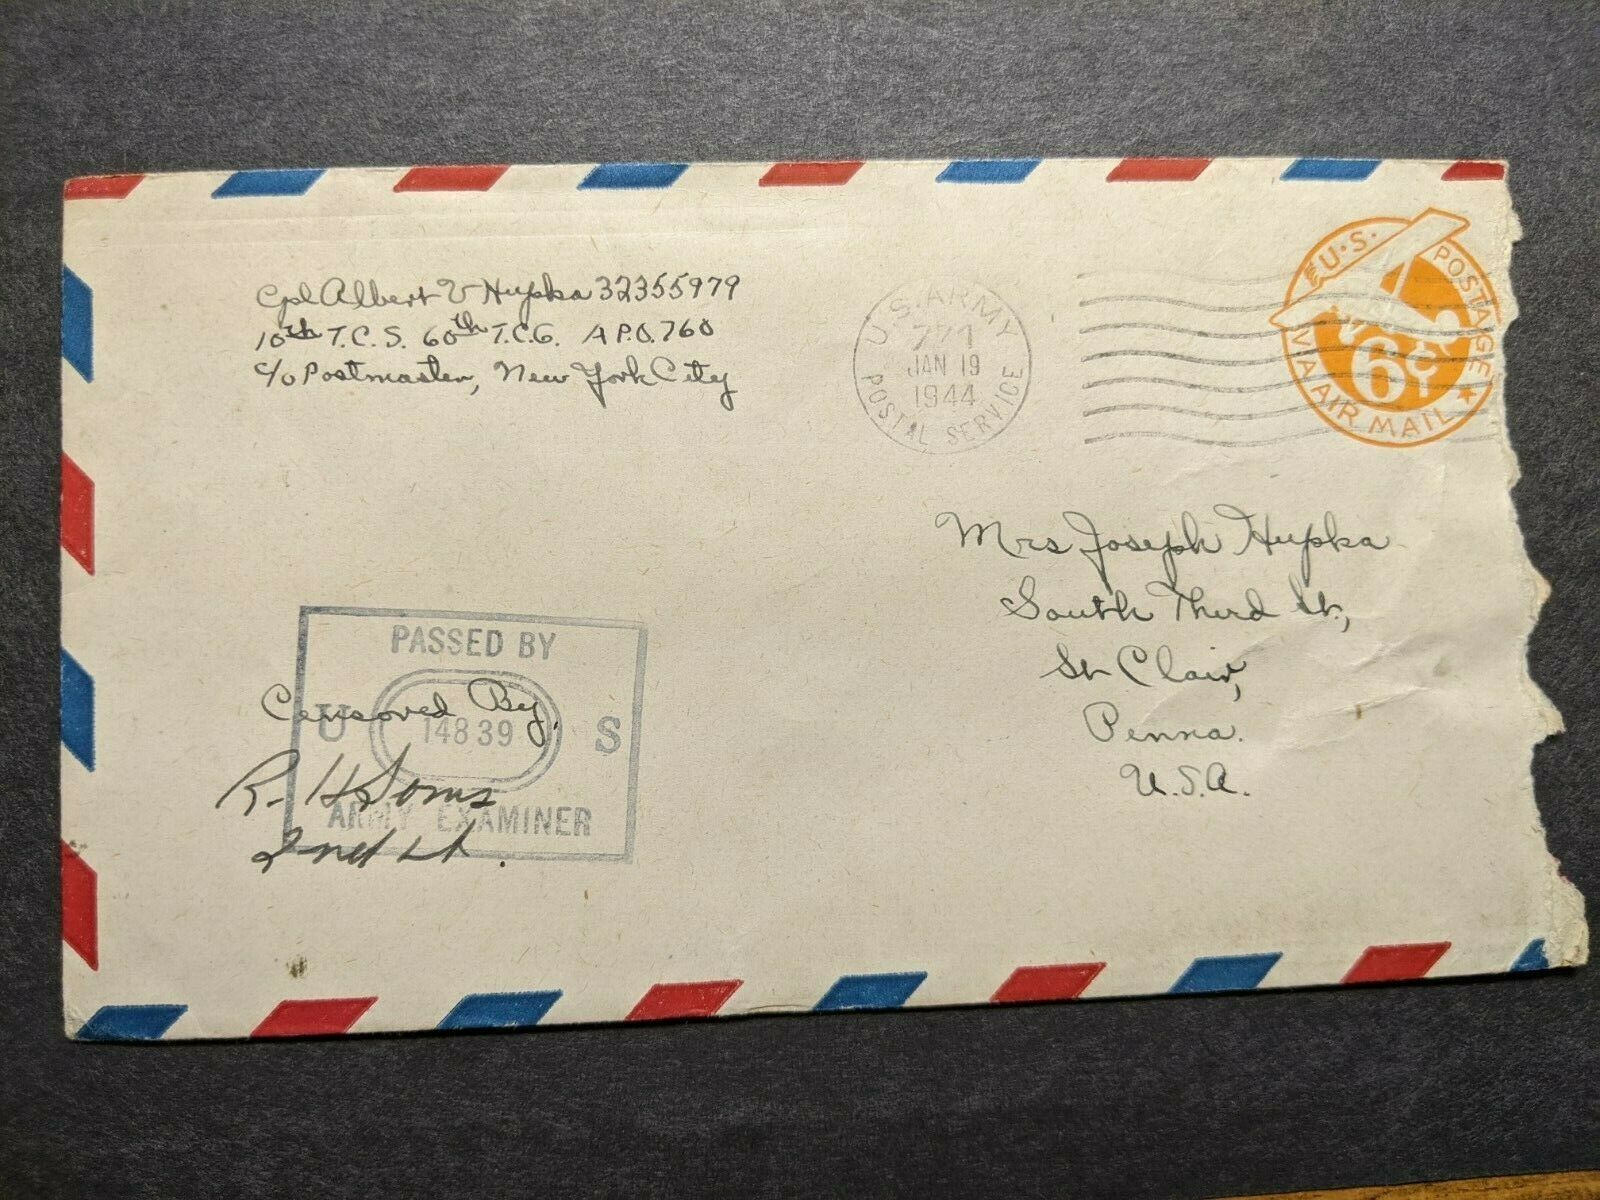 APO 760 PALERMO, SICILY, ITALY 1944 Censored WWII Army Cover 10 TCS ...